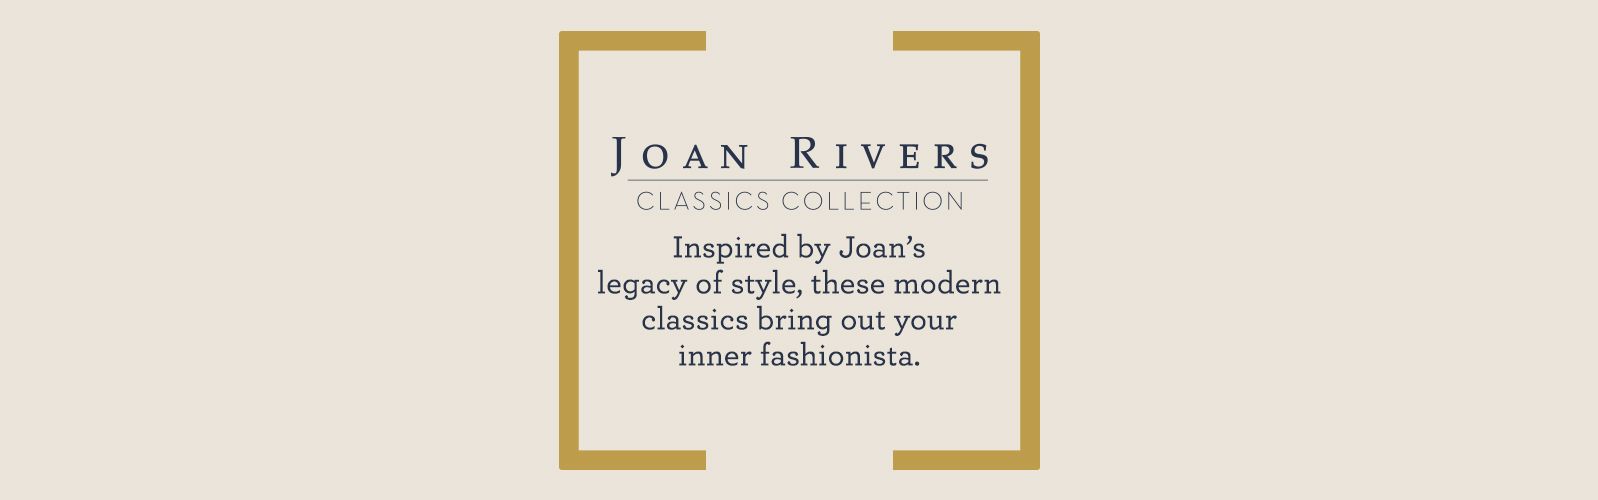 Joan Rivers Classics Collection